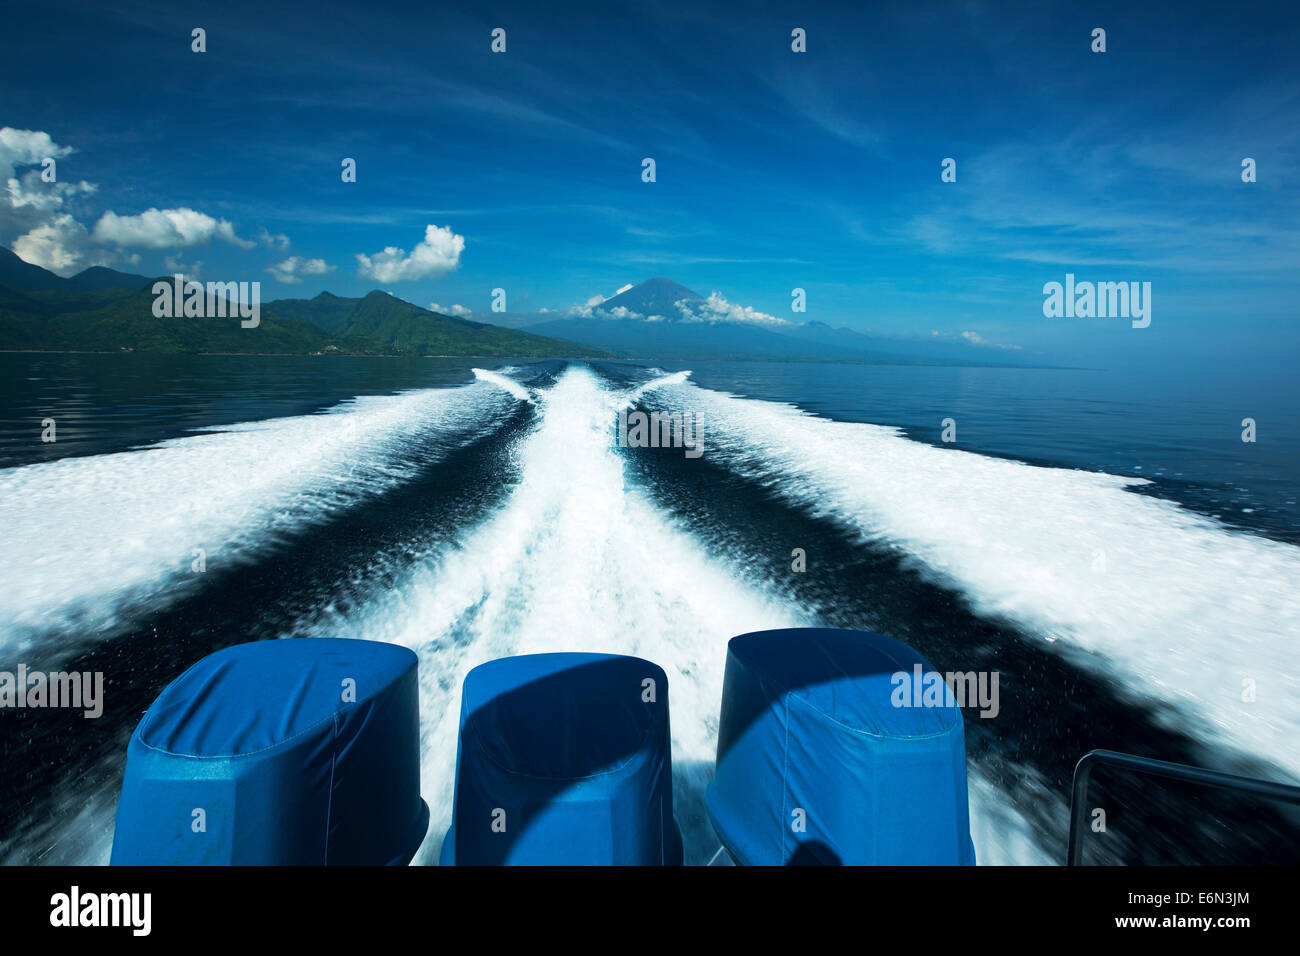 Seed boat traveling to Gili Islands from Bali with Mount Agung in back ground. Stock Photo